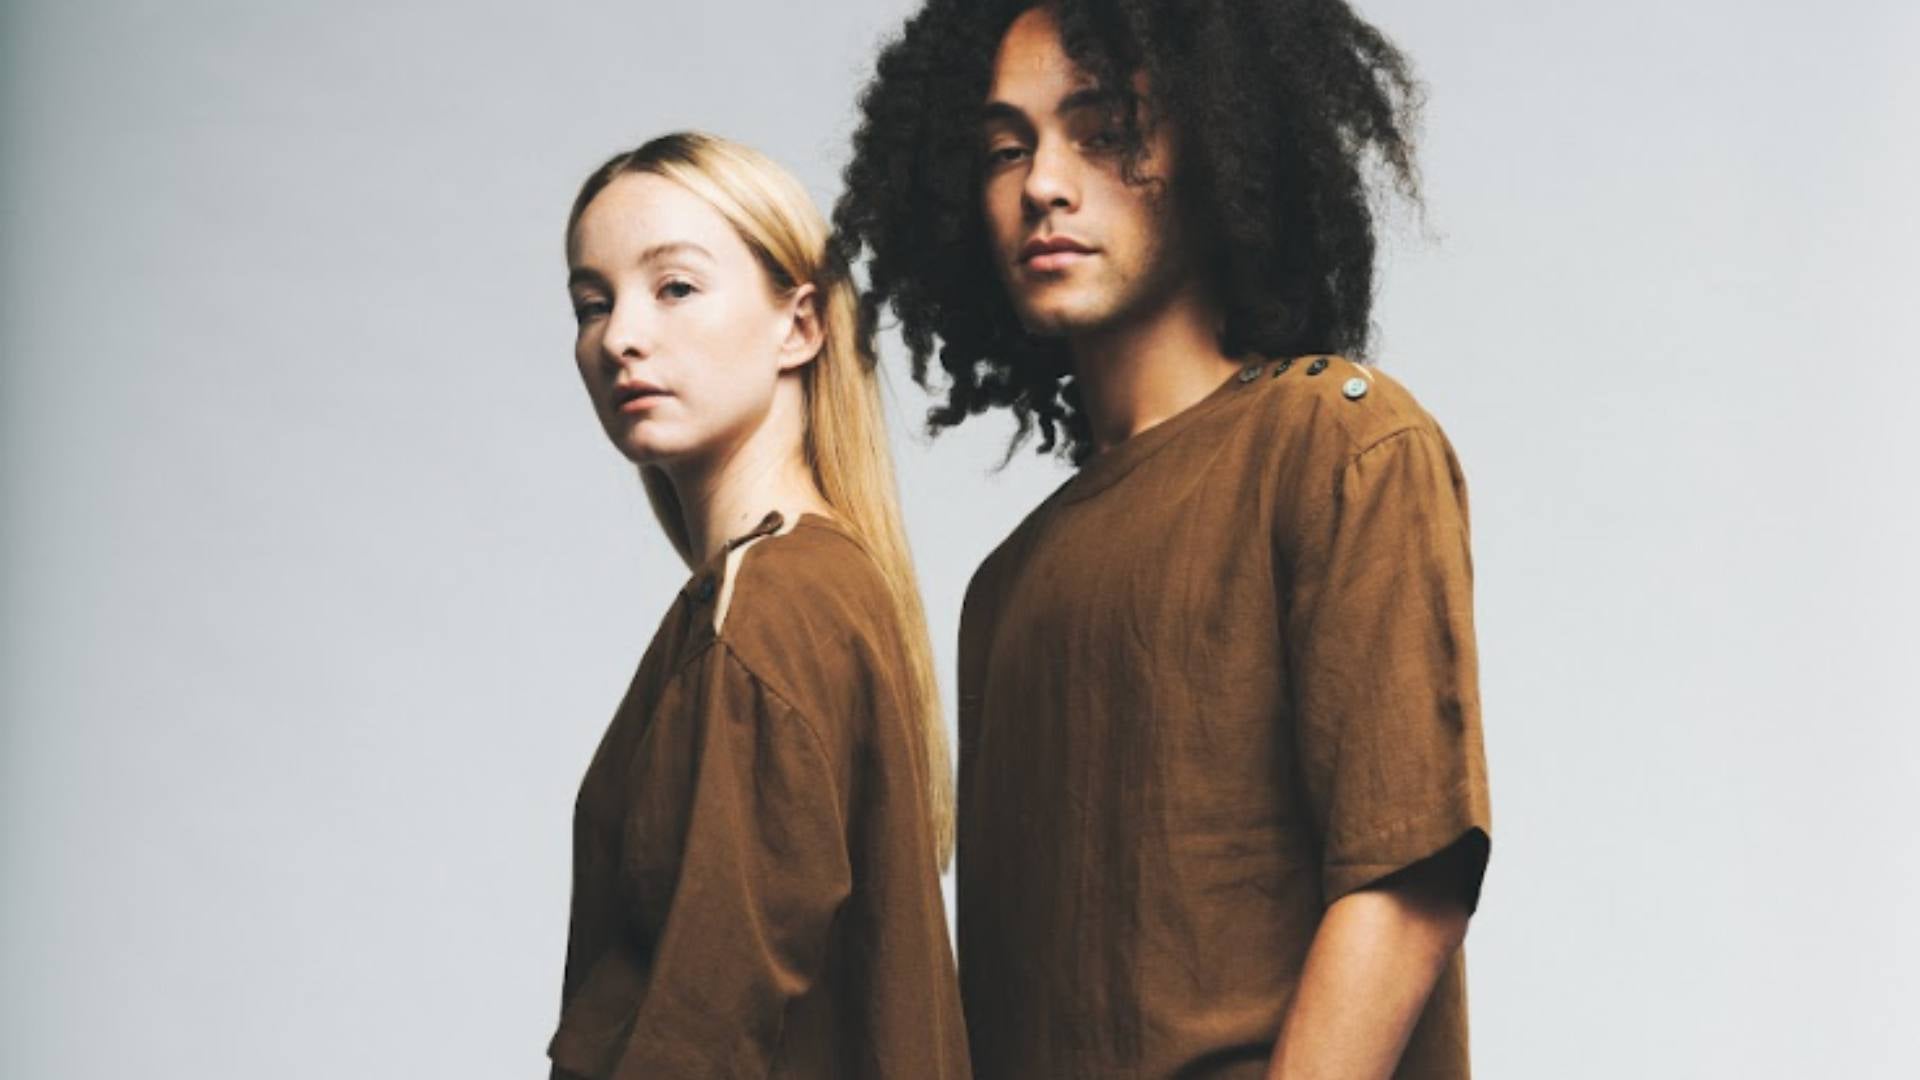 One blonde woman and one brunette man stand together and look at the camera while wearing matching brown shirts, demonstrating sustainable Valentine's Day options.